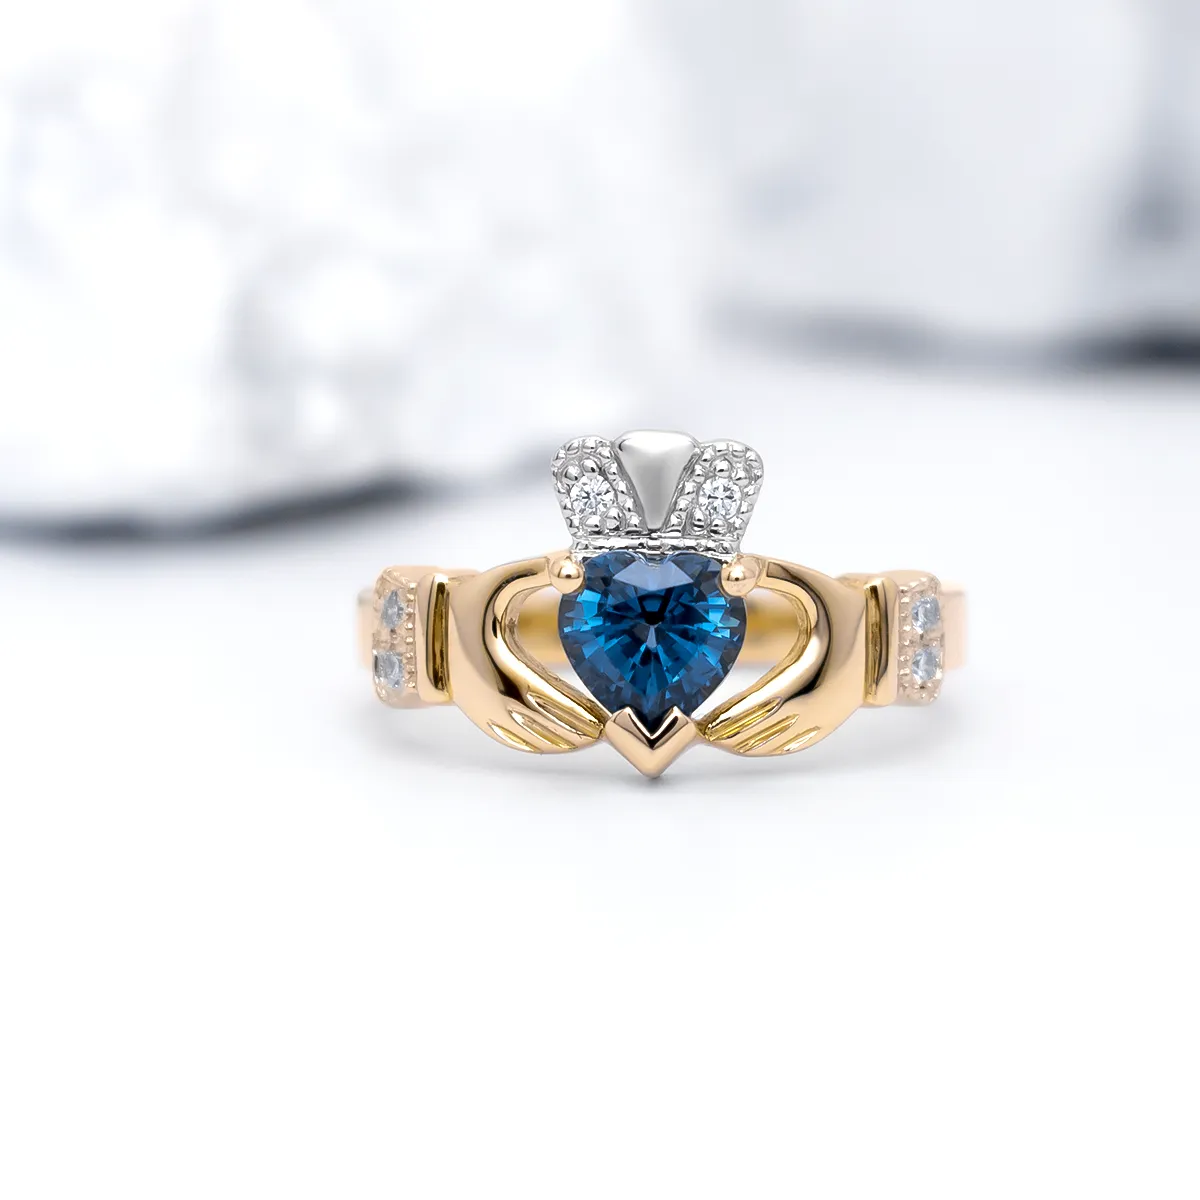 Gold And Sapphire Claddagh Ring With Brilliant Cut Diamond